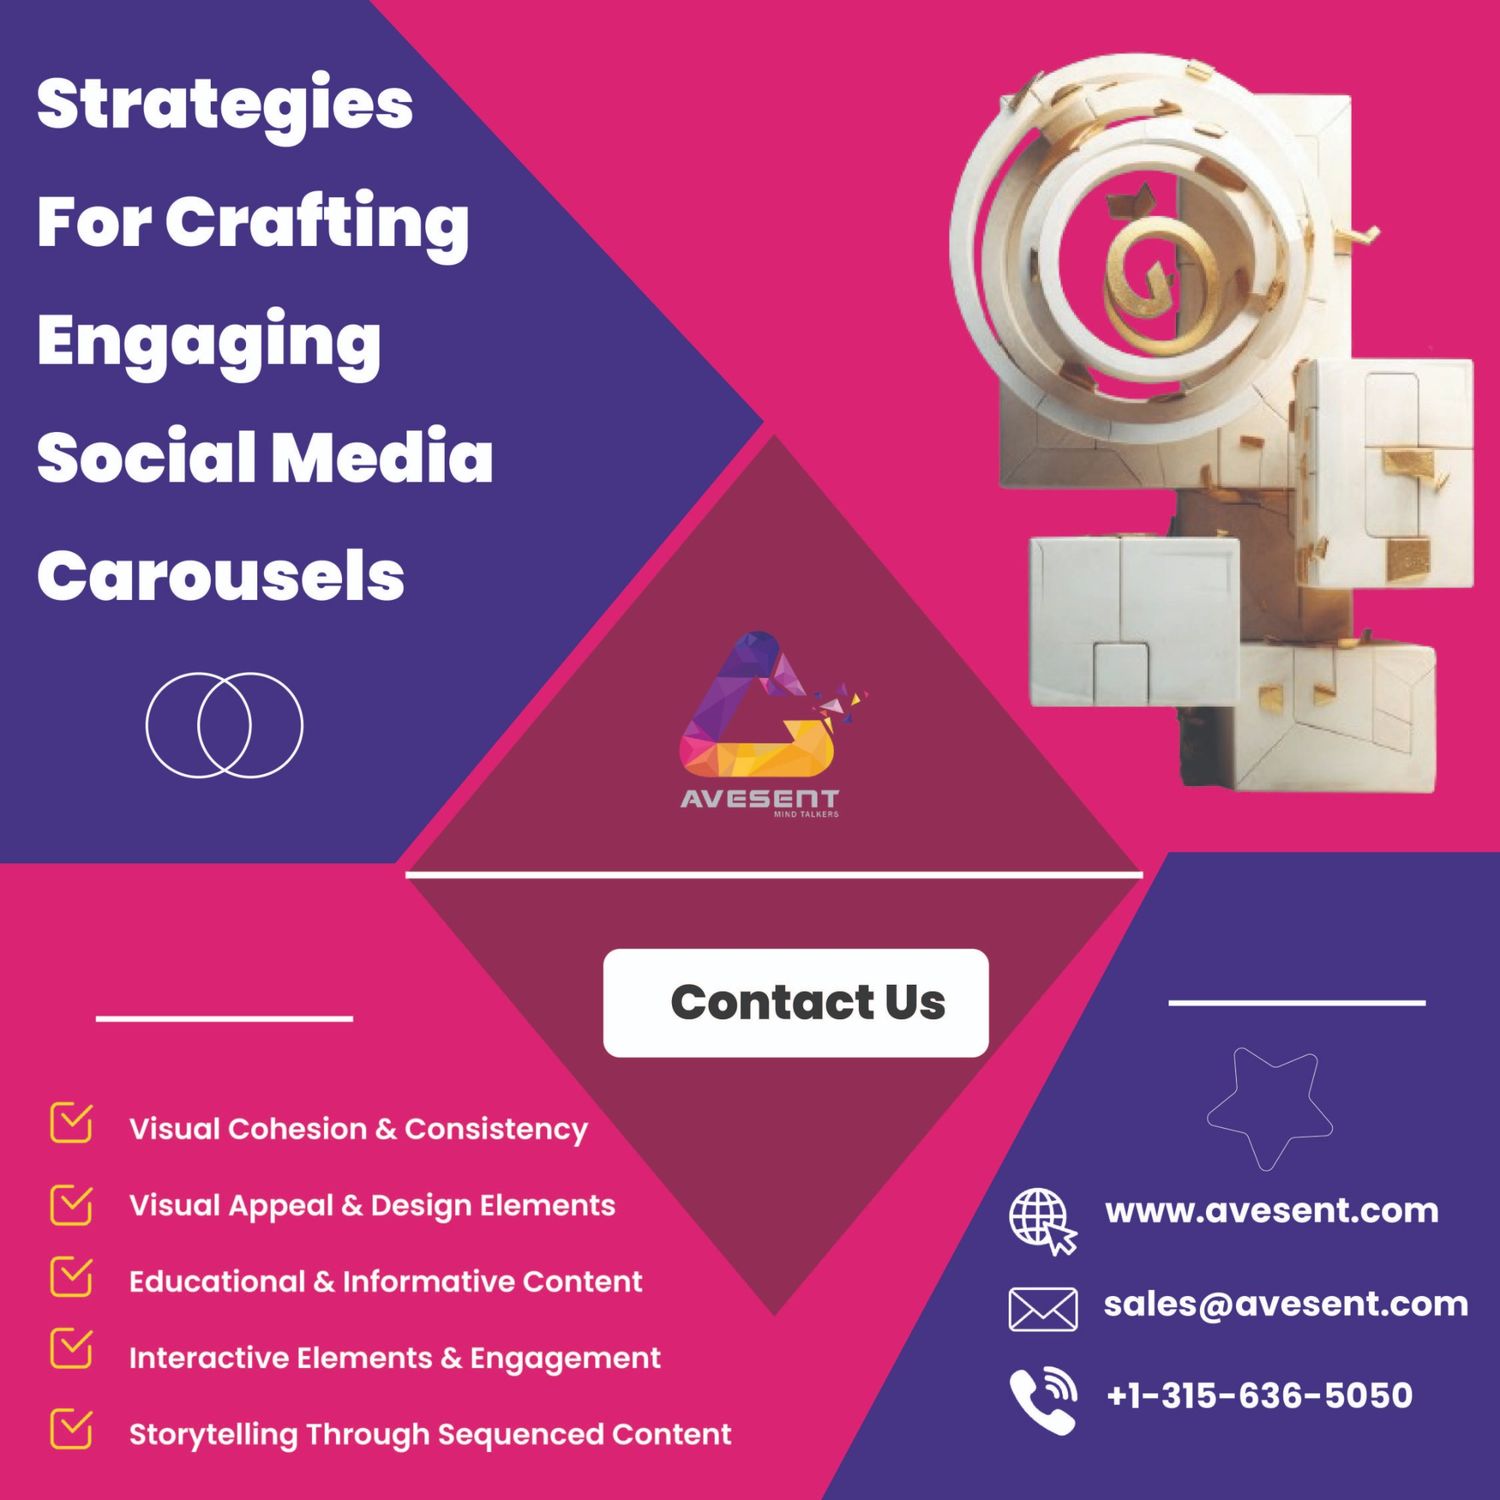 You are currently viewing Strategies for Crafting Engaging Social Media Carousels